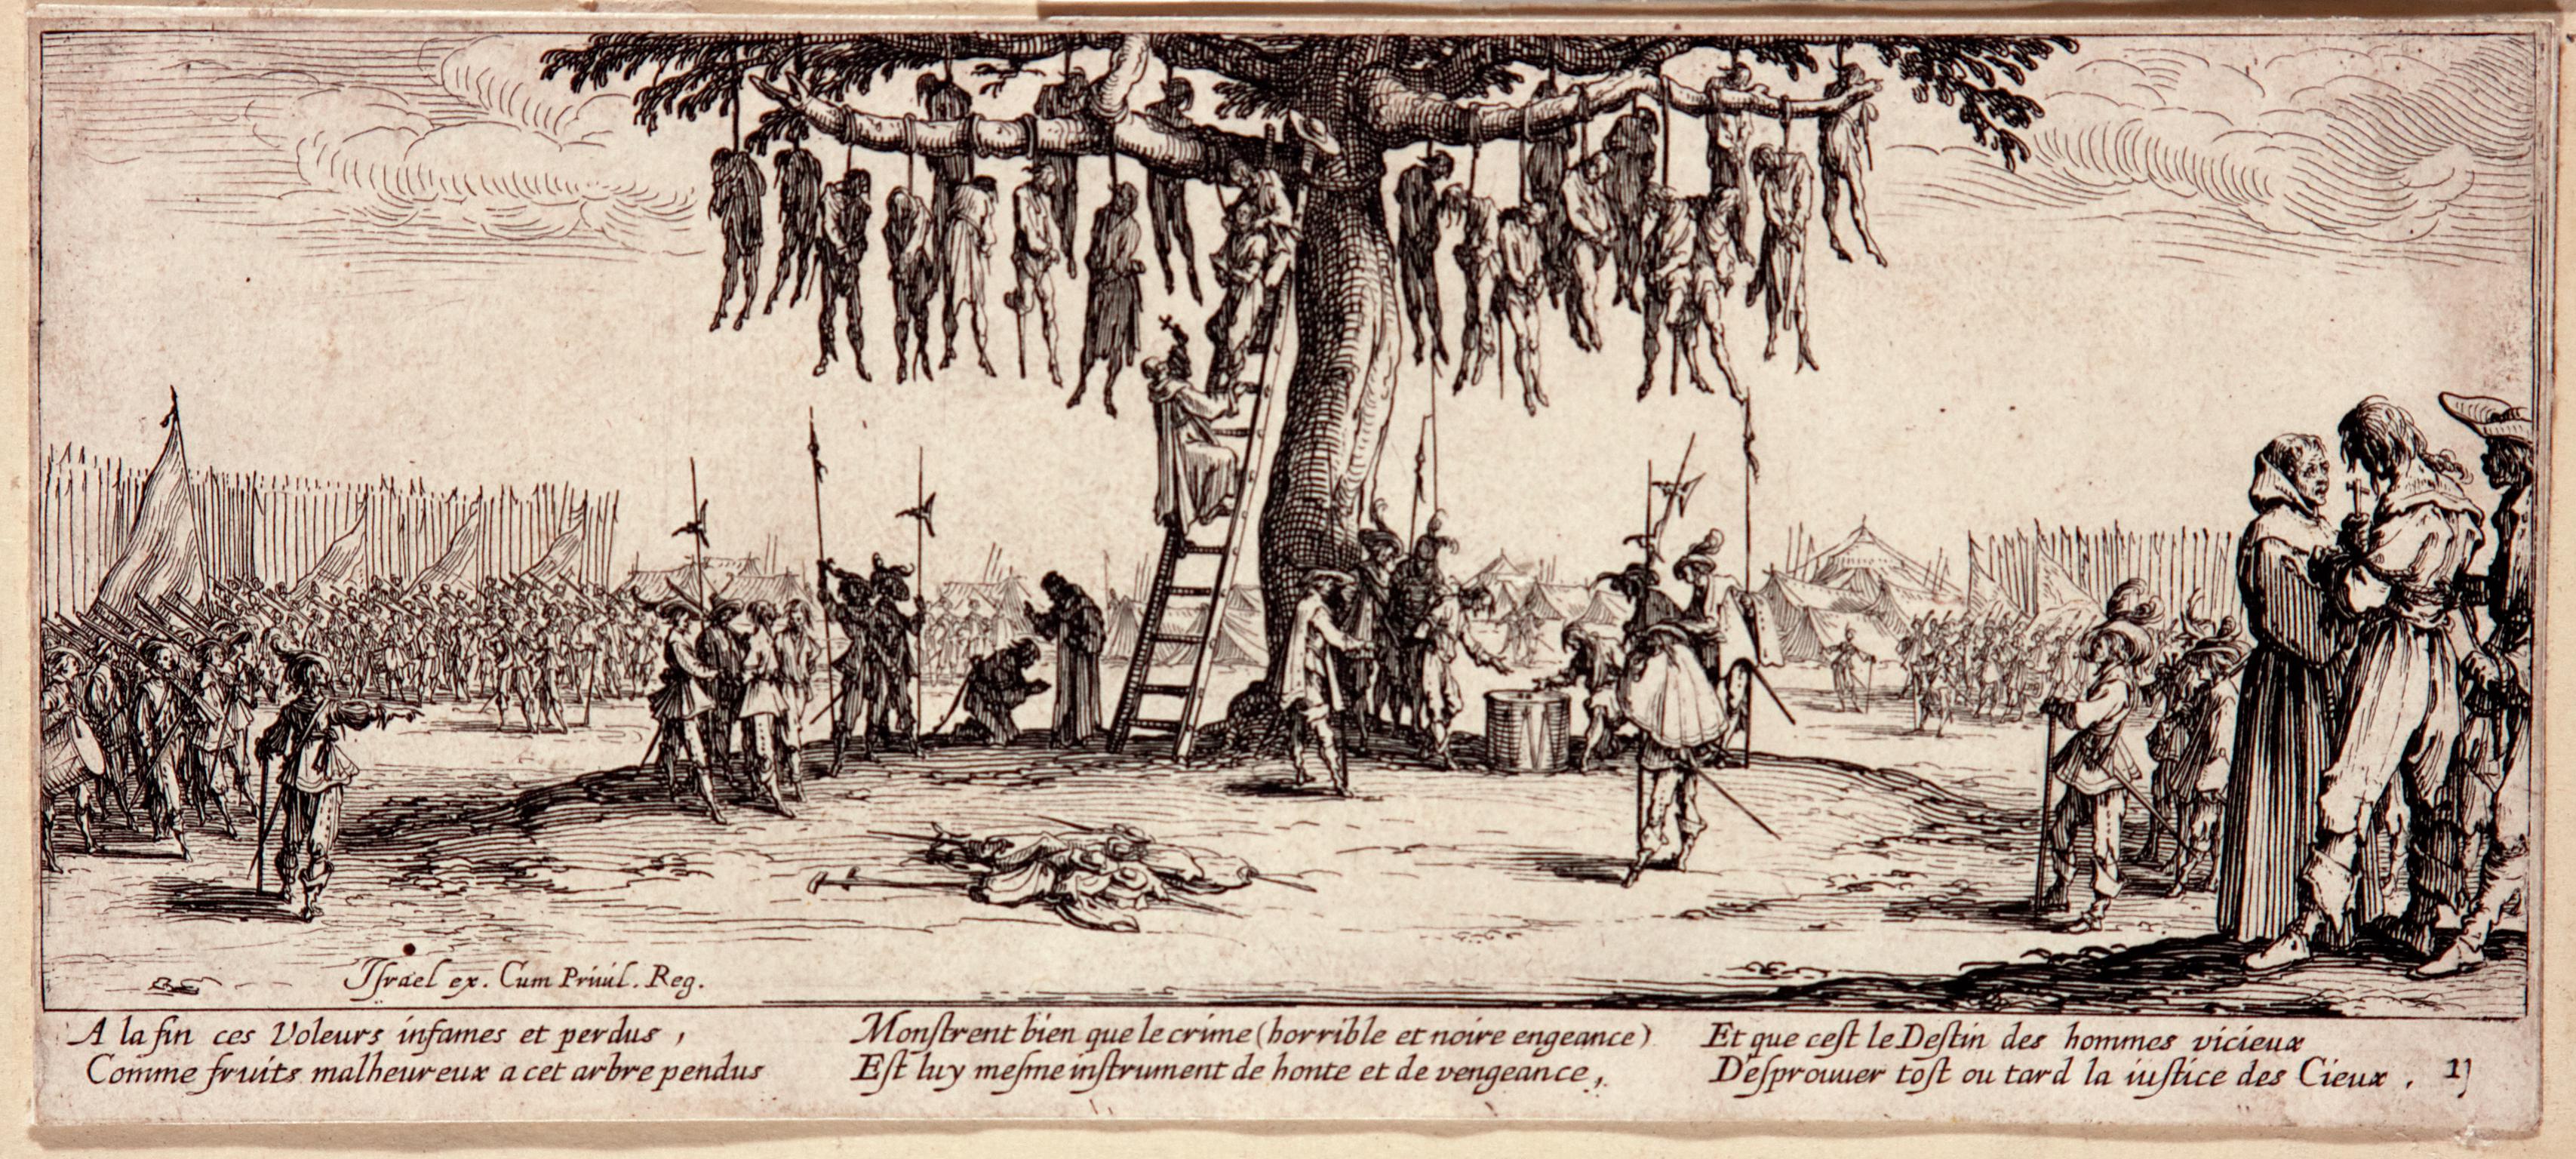 The pendaison with a score of bodies hanging from an oak